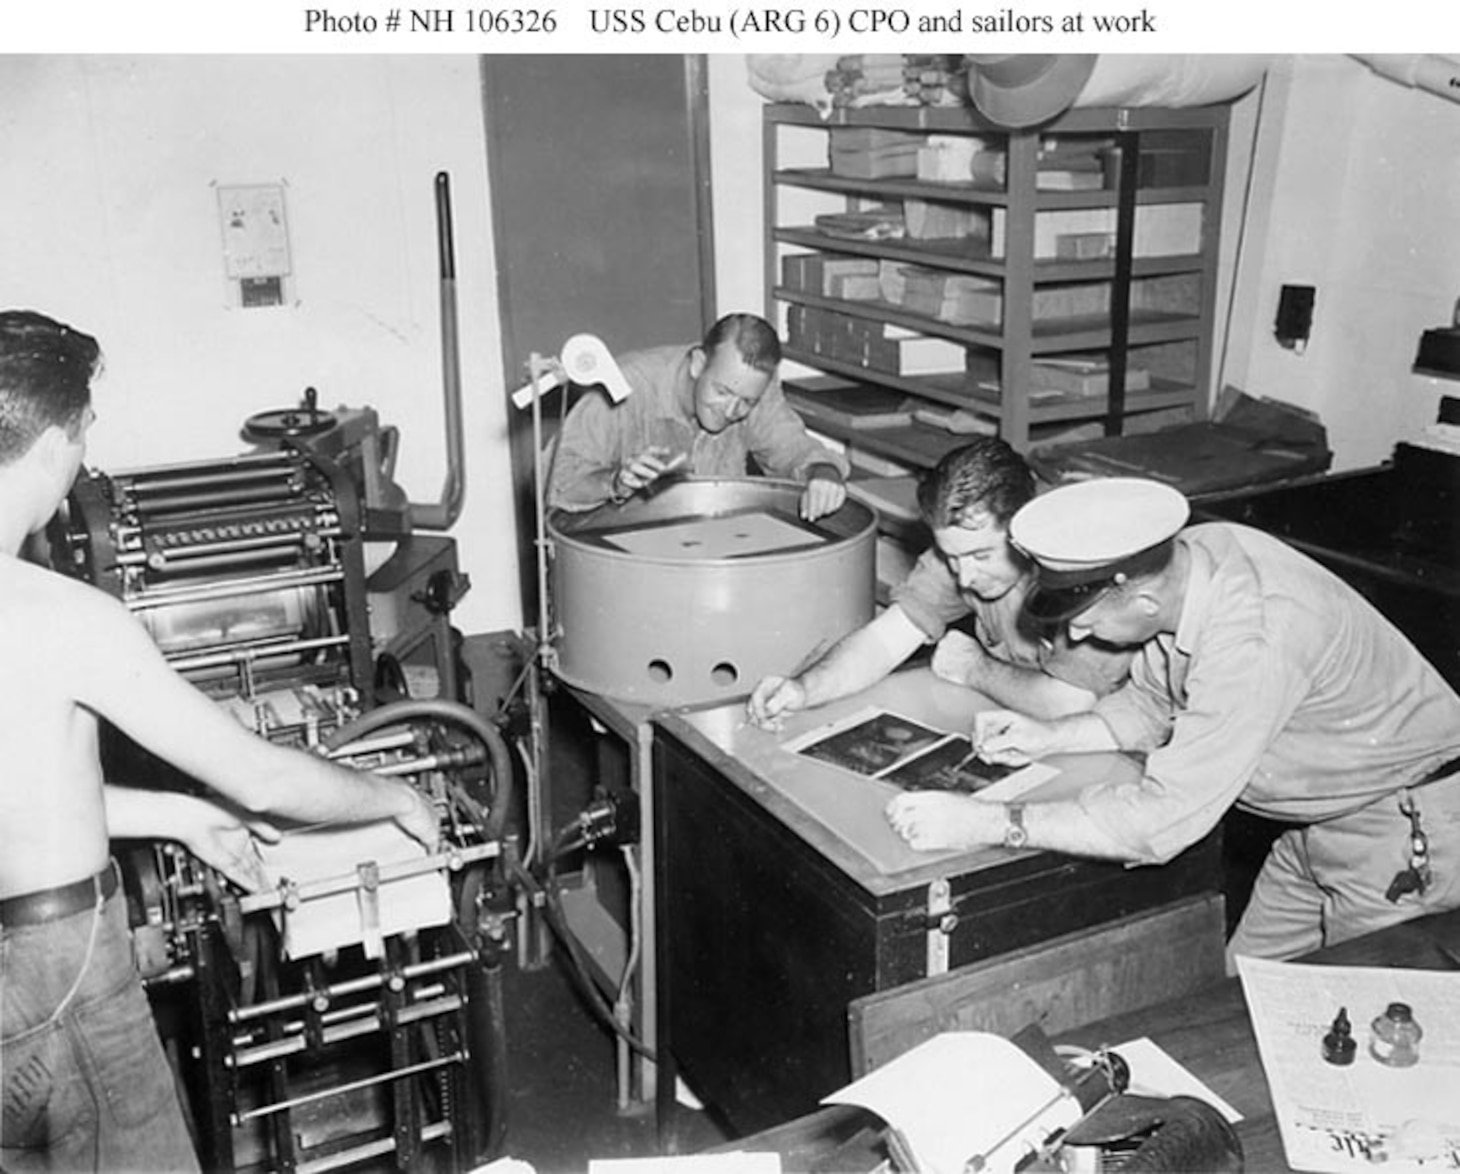 USS Cebu (ARG-6) Sailors and a Chief Petty Officer at work in one of the ship's shops, circa 1944-1945. This appears to be a photo lab, print shop or graphics office. Photograph from the George H. Dunn Album, donated by Charles R. Haberlein Jr., 2008.